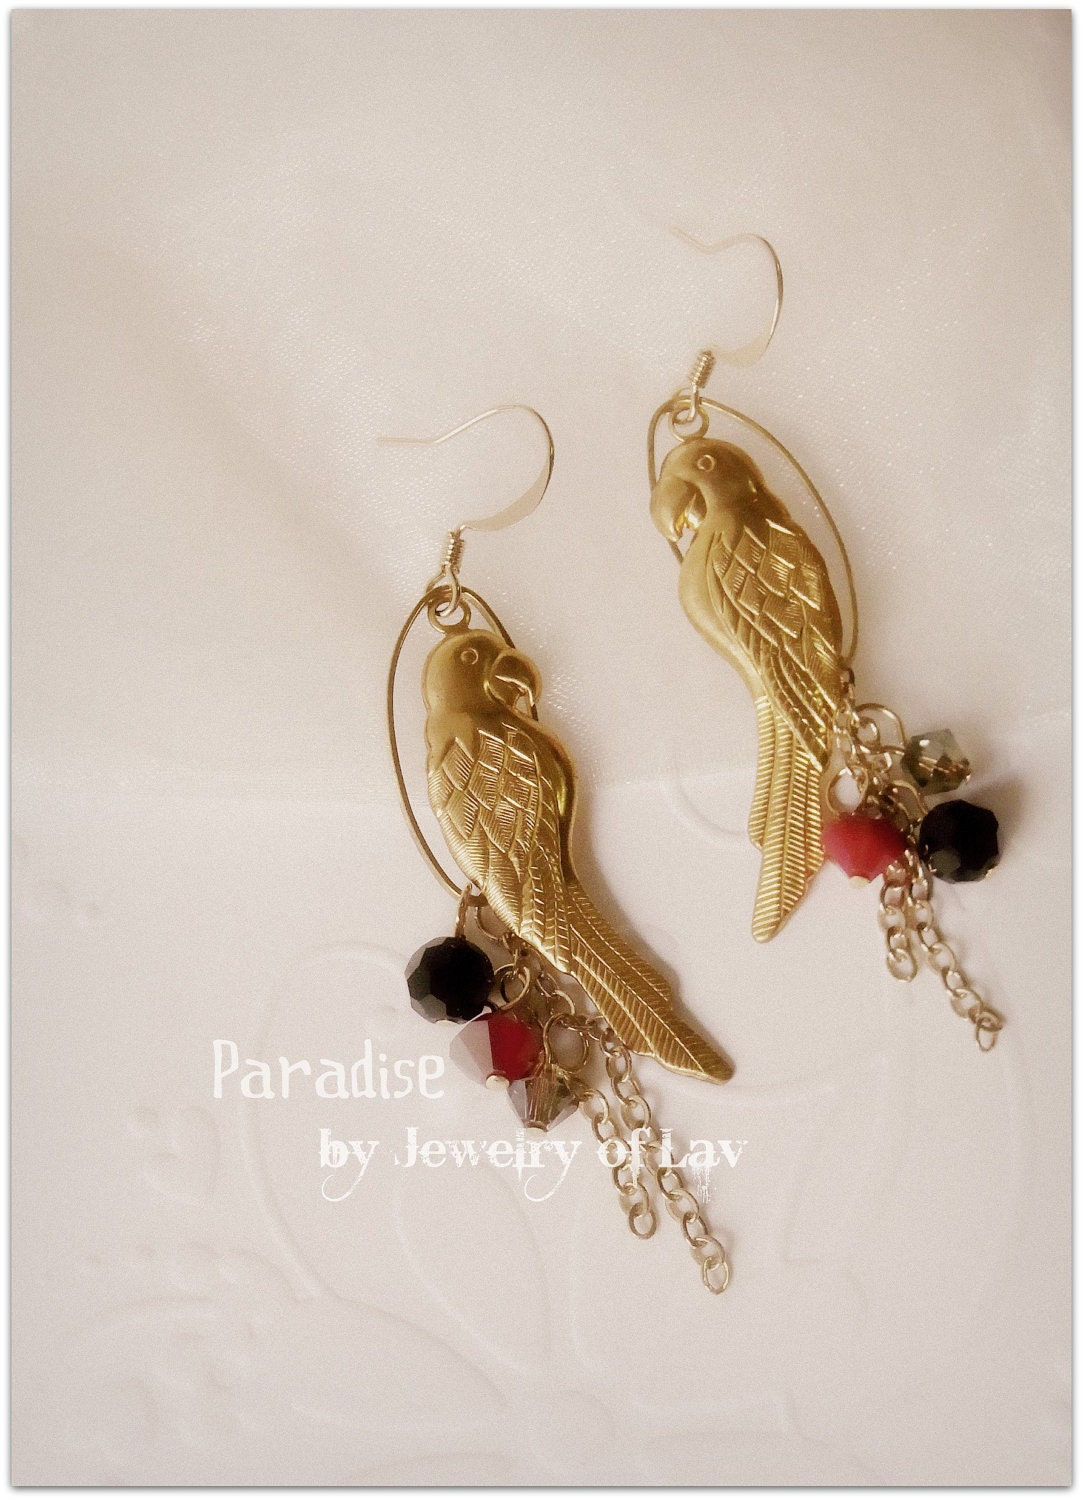 Paradise Earring made with parrot charms, swarovski crystals, gold-plated ear hooks etc.